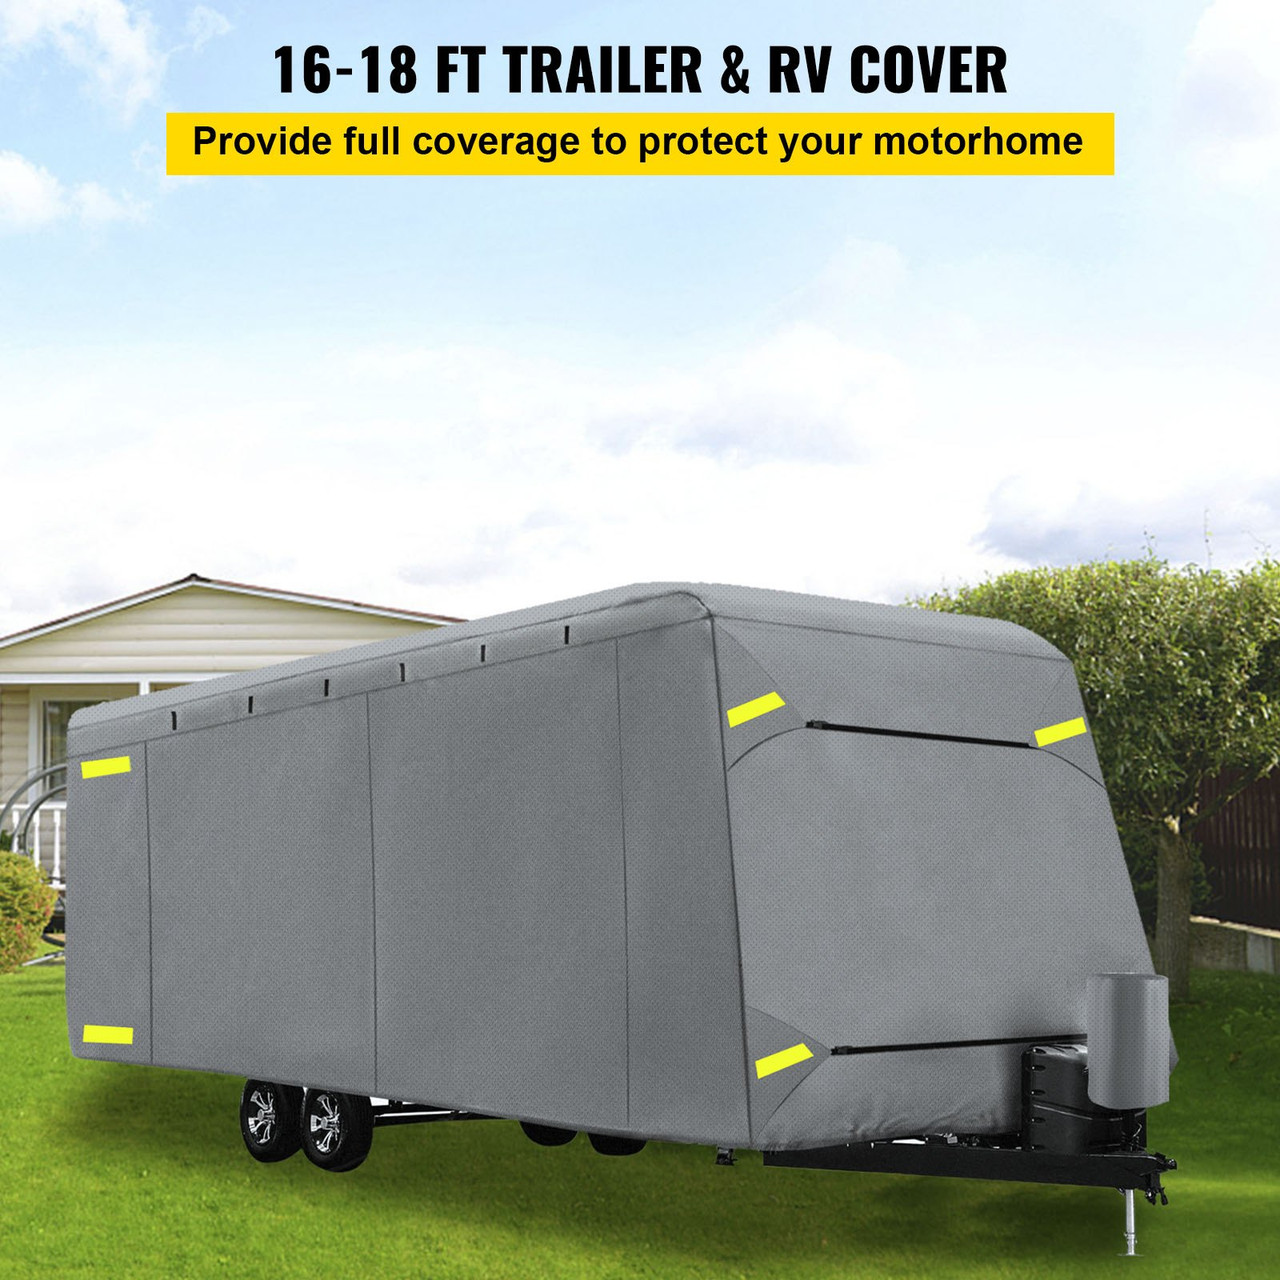 RV Cover, 16'-18' Travel Trailer RV Cover, Windproof RV & Trailer Cover, Extra-Thick 4 Layers Durable Camper Cover, Waterproof Ripstop Anti-UV for RV Motorhome with Adhesive Patch & Storage Bag